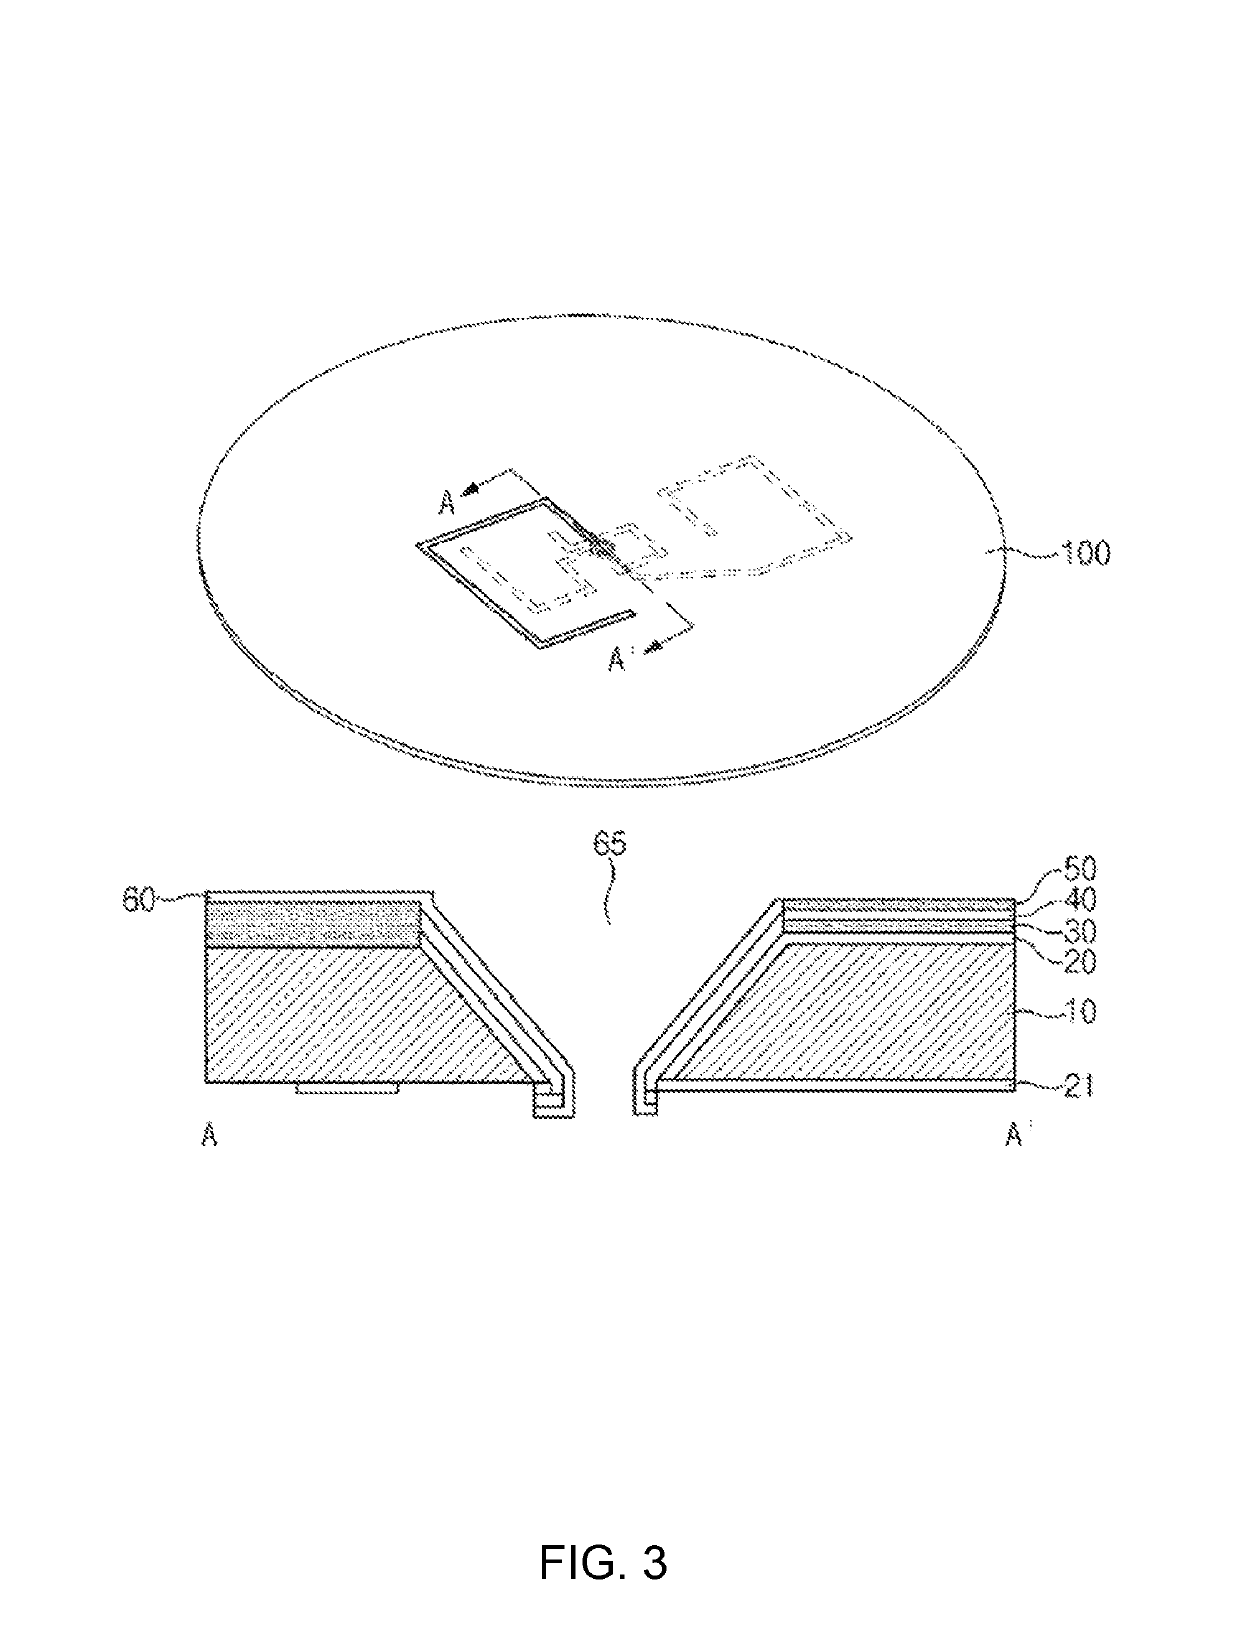 Method for manufacturing a circuit having a lamination layer using laser direct structuring process